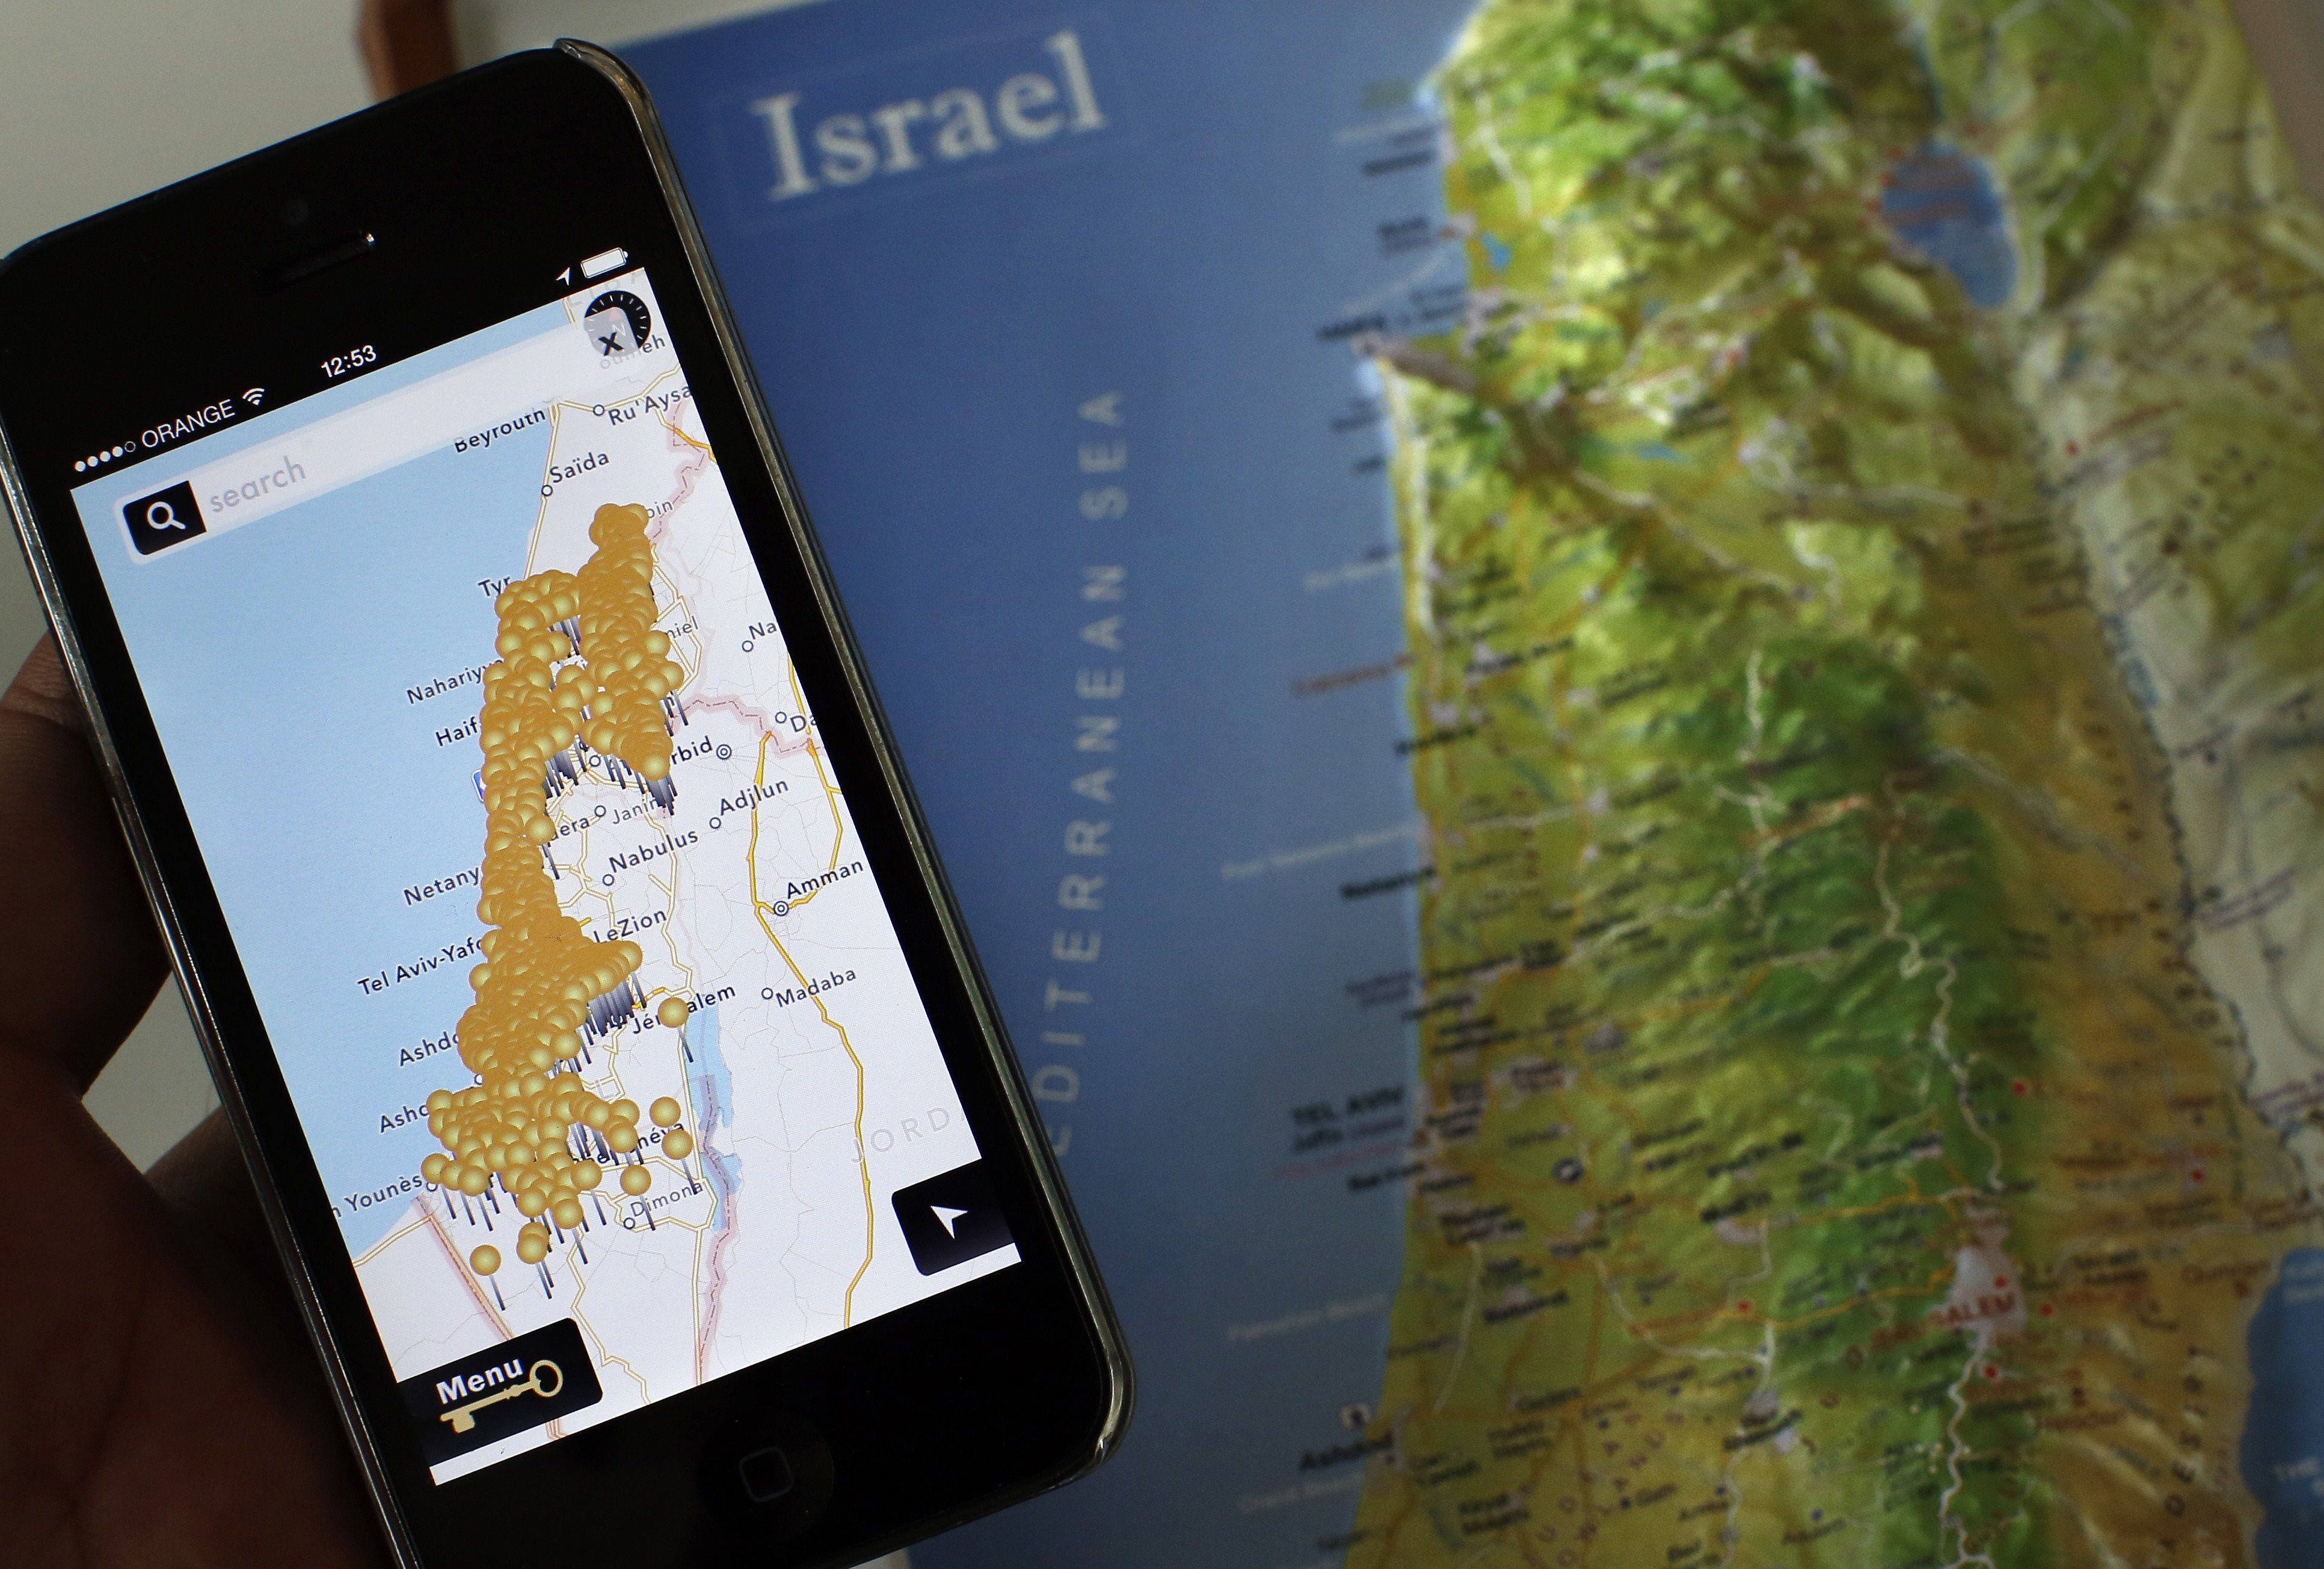 A smartphone placed on an Israeli map in Jerusalem, displaying the new <i>iNakba</i> application that allows users to find the remains of Palestinian villages that now lie inside modern-day Israel, May 5, 2014. (Thomas Coex—AFP/Getty Images)